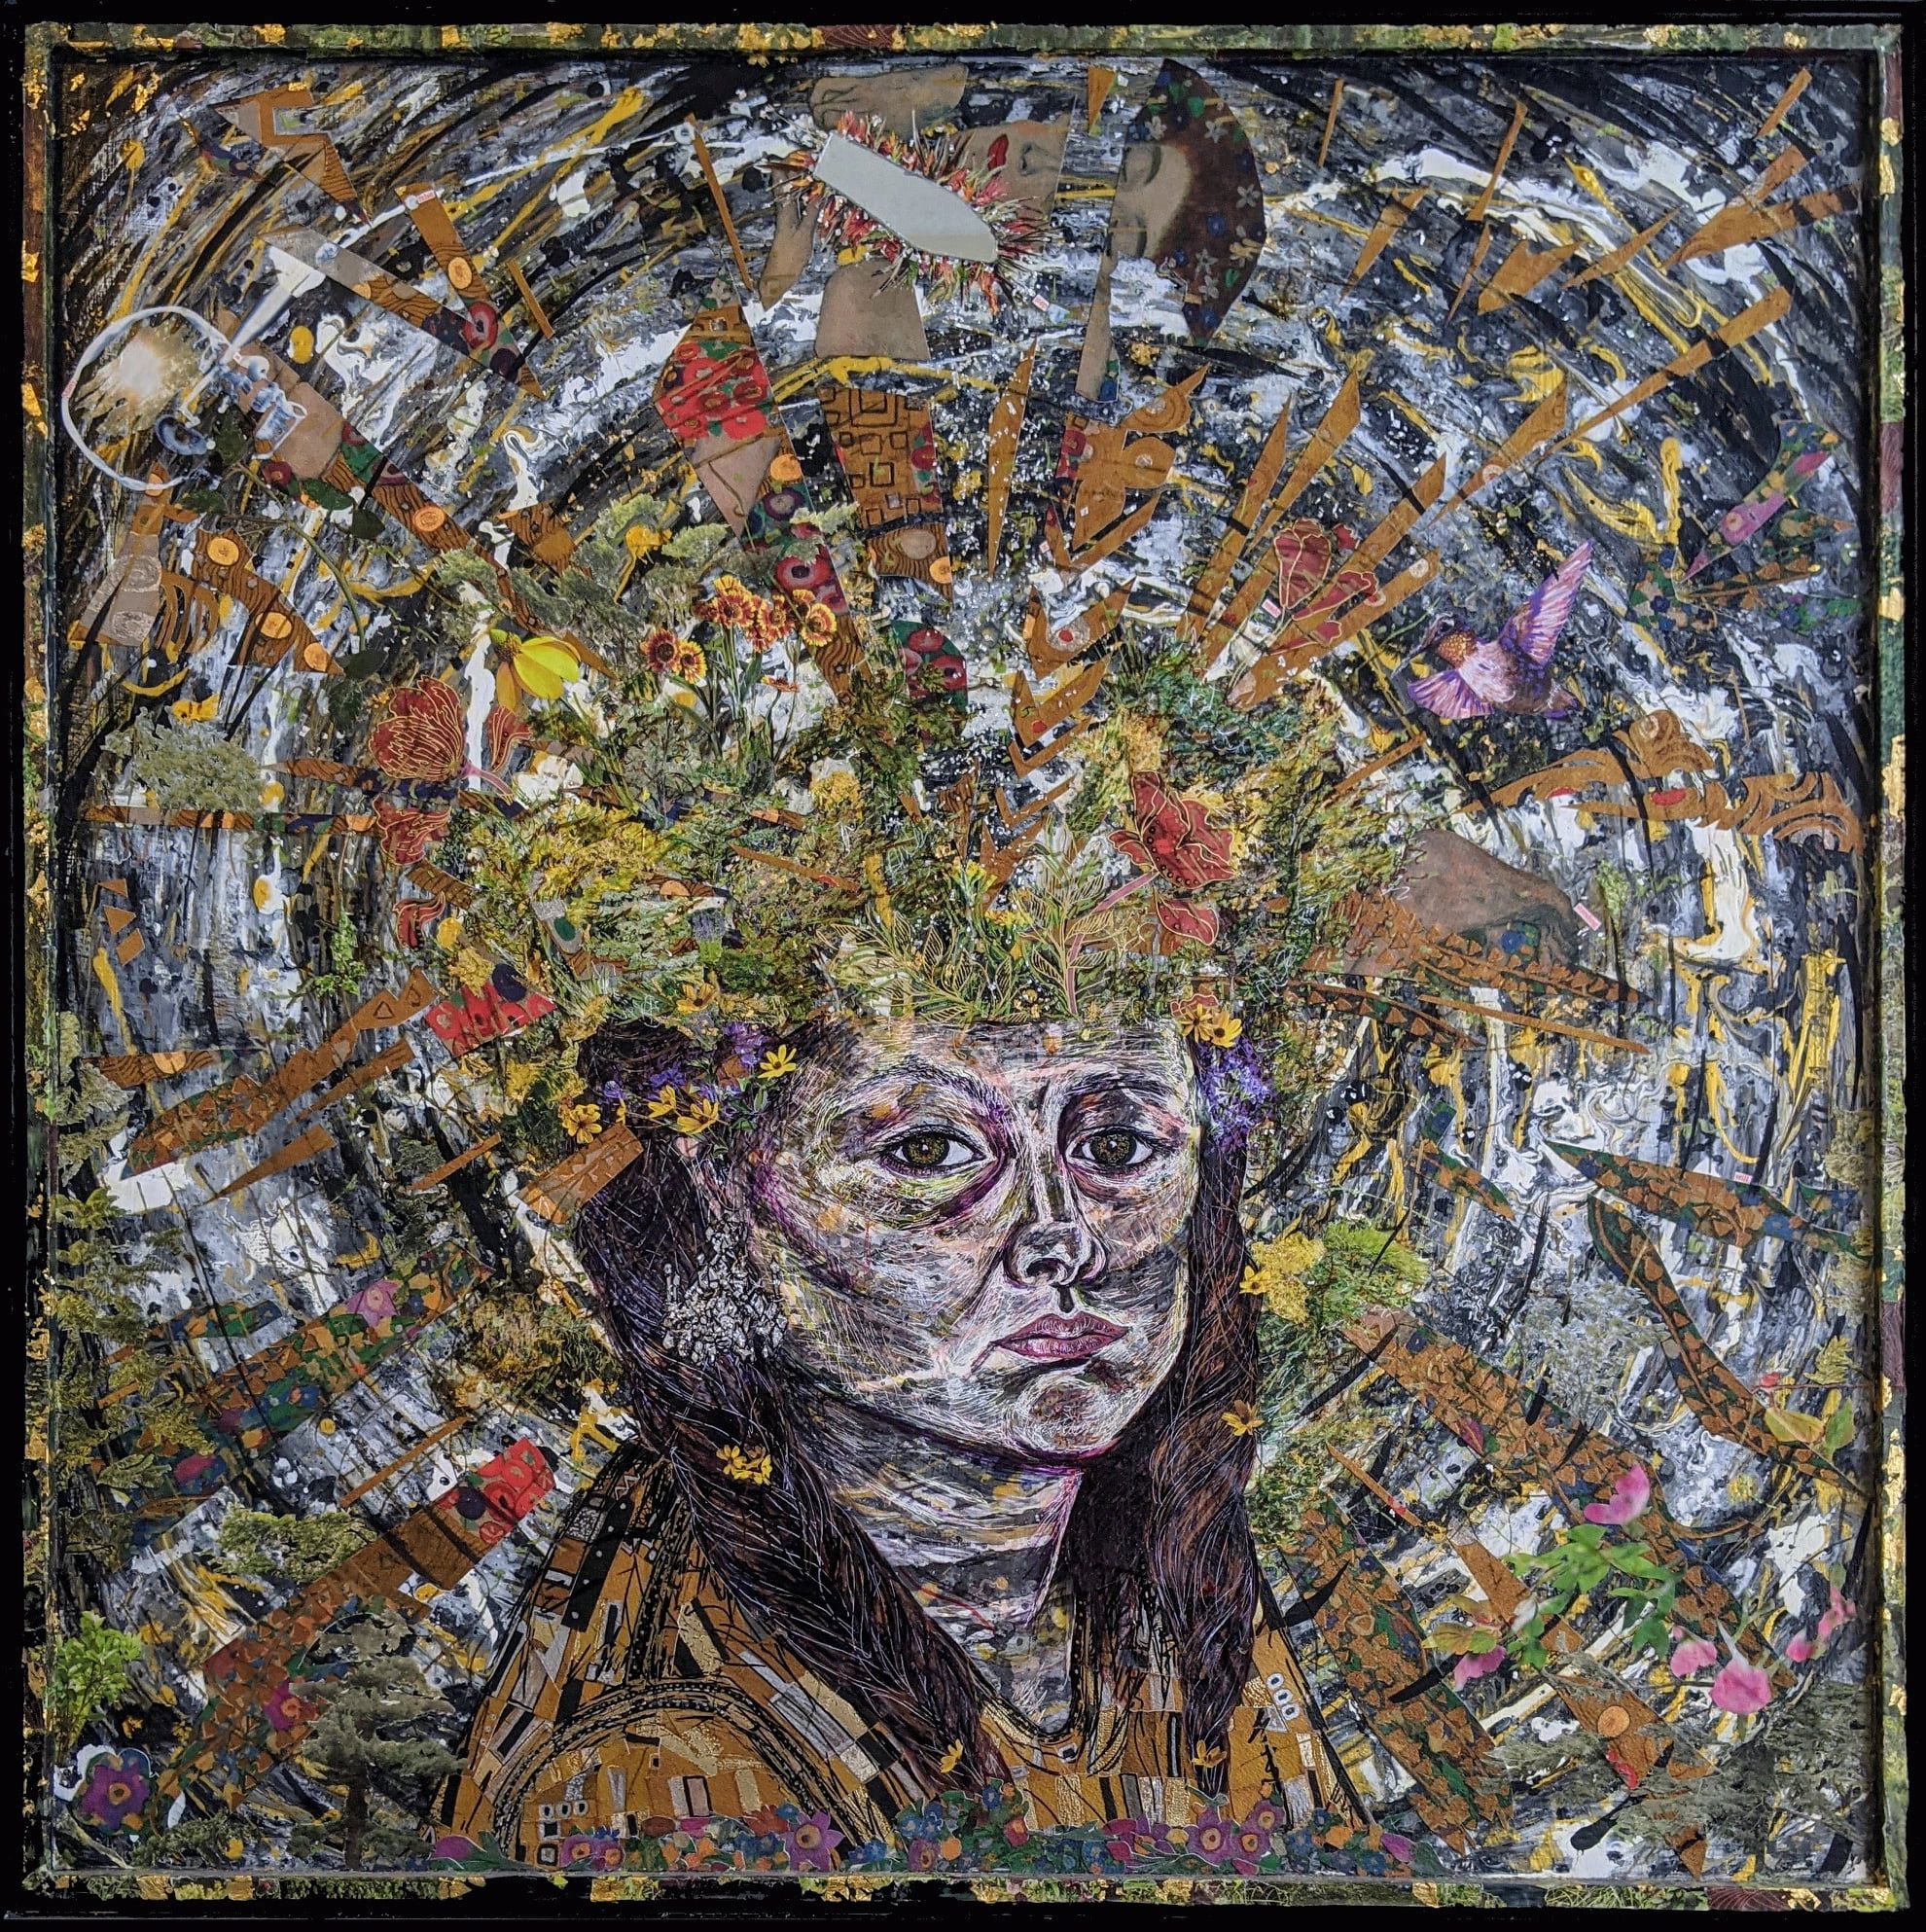 29" x 29" mixed media self portrait collage on board in silver frame